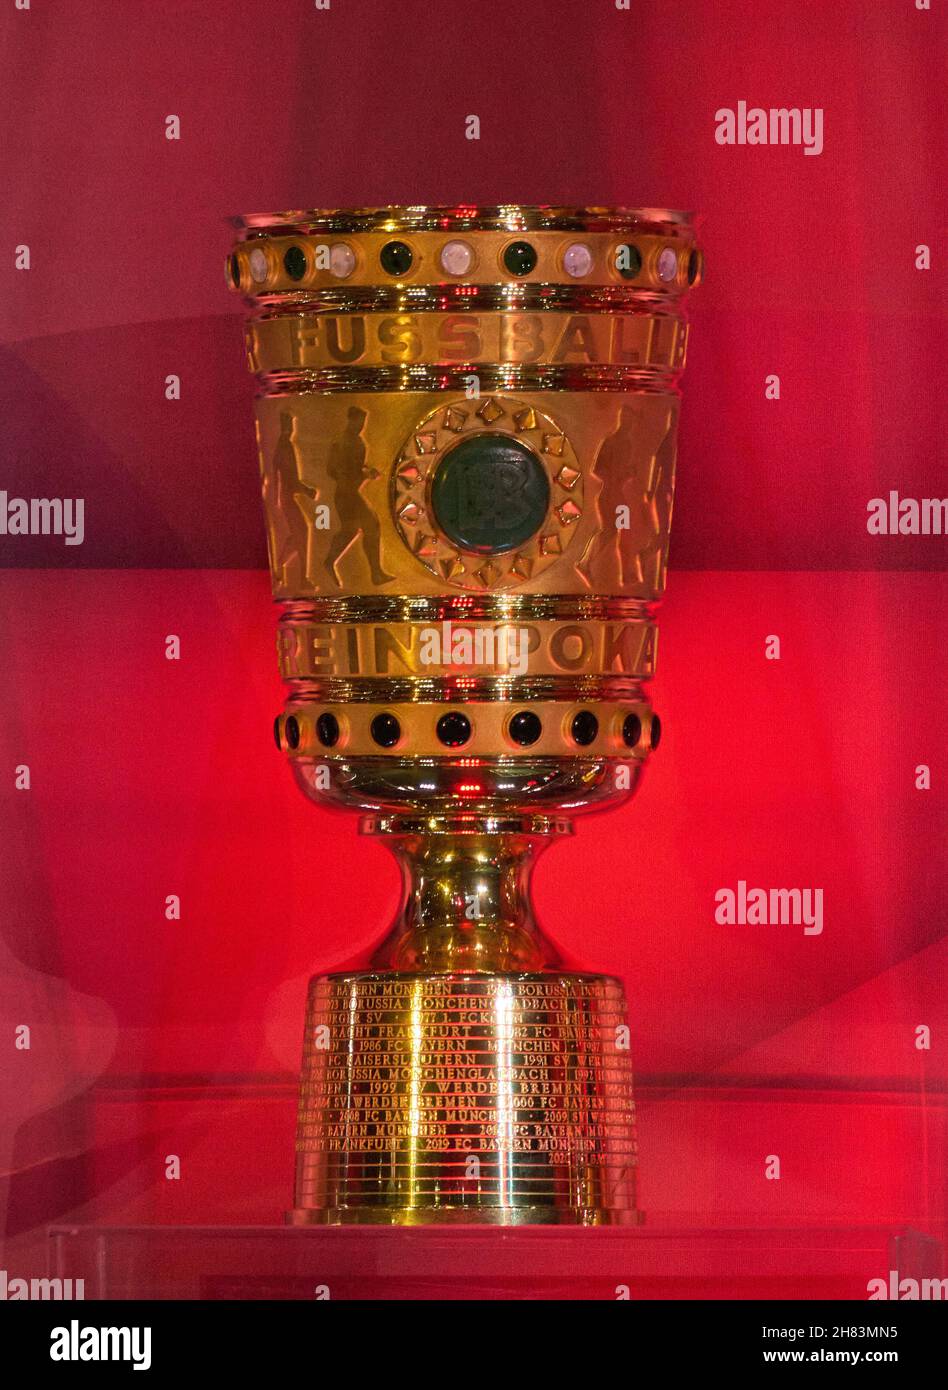 All important trophies: DFB Pokal at the annual general Meeting of  FC BAYERN MÜNCHEN in Audi Dome Munich, November 25, 2021,  Season 2021/2022,  © Peter Schatz / Alamy Live News Stock Photo